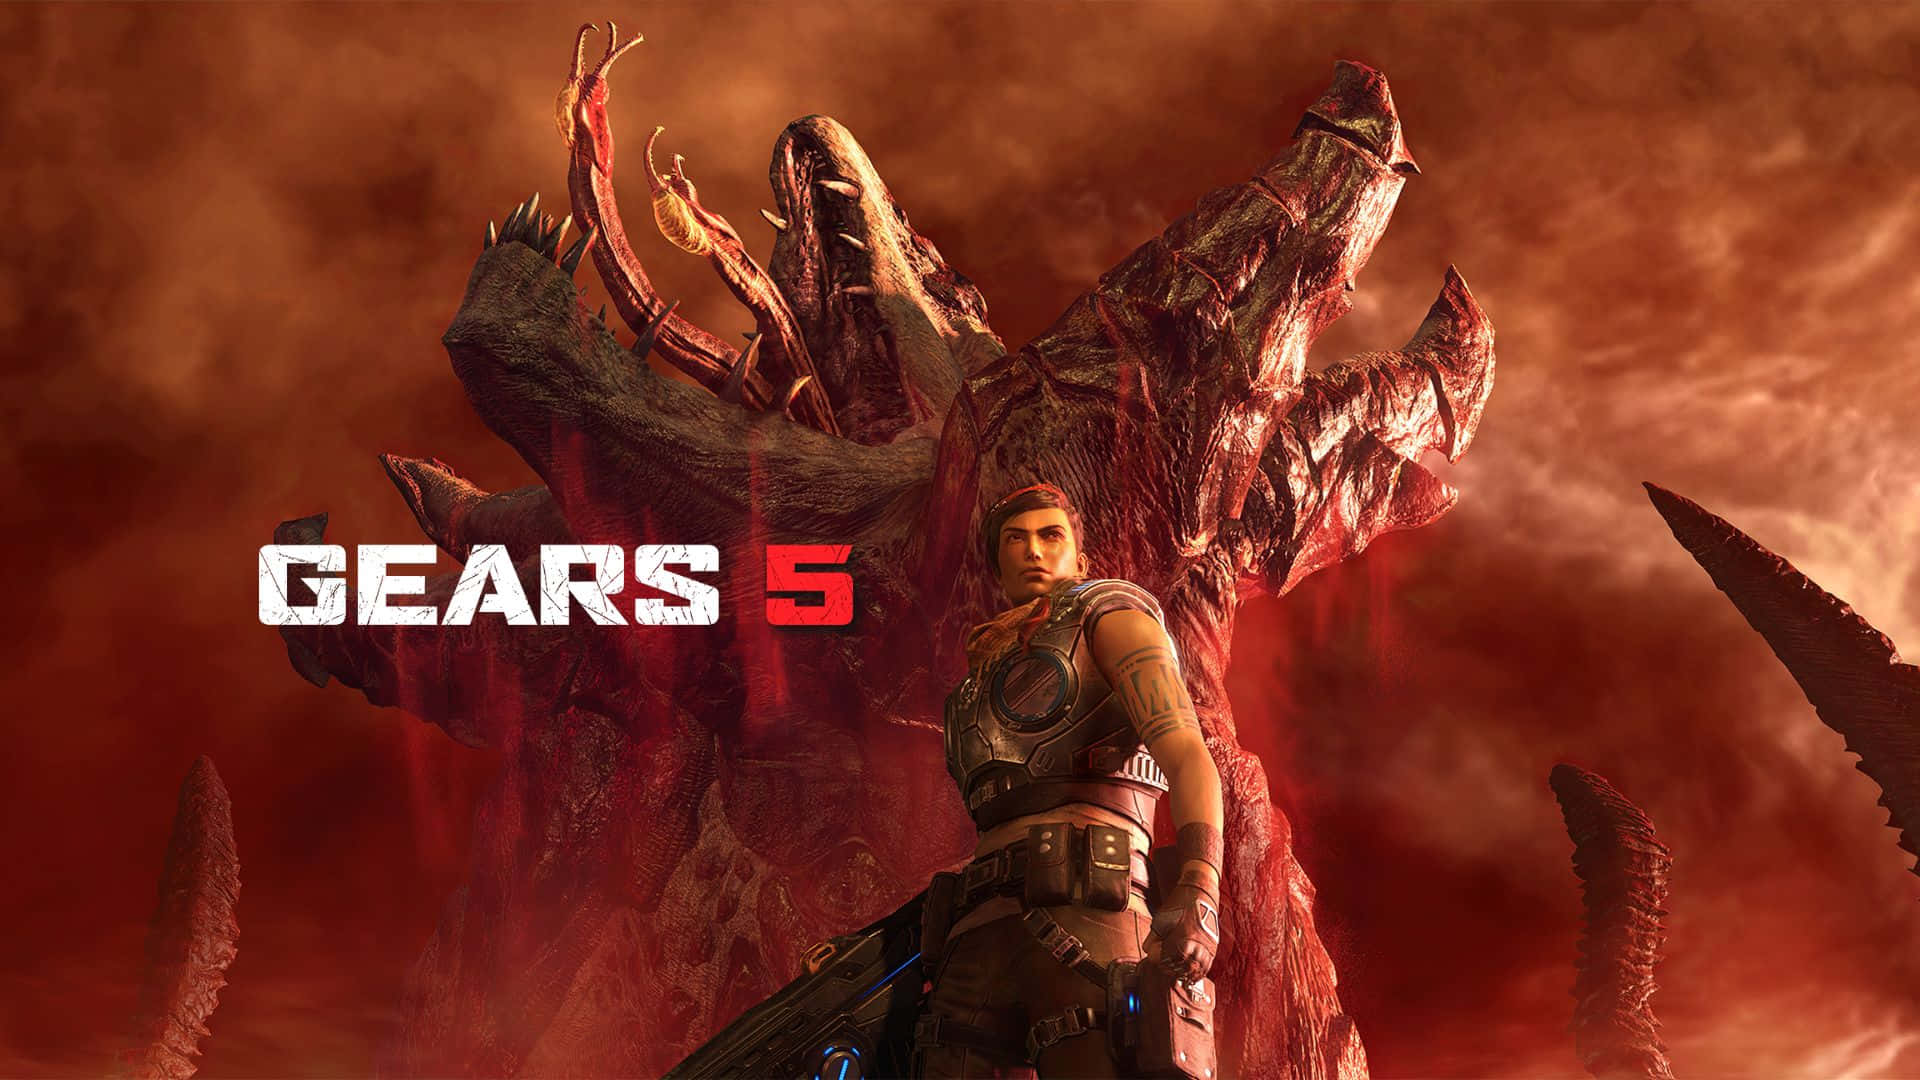 Battle across time and space in Gears of War 5.